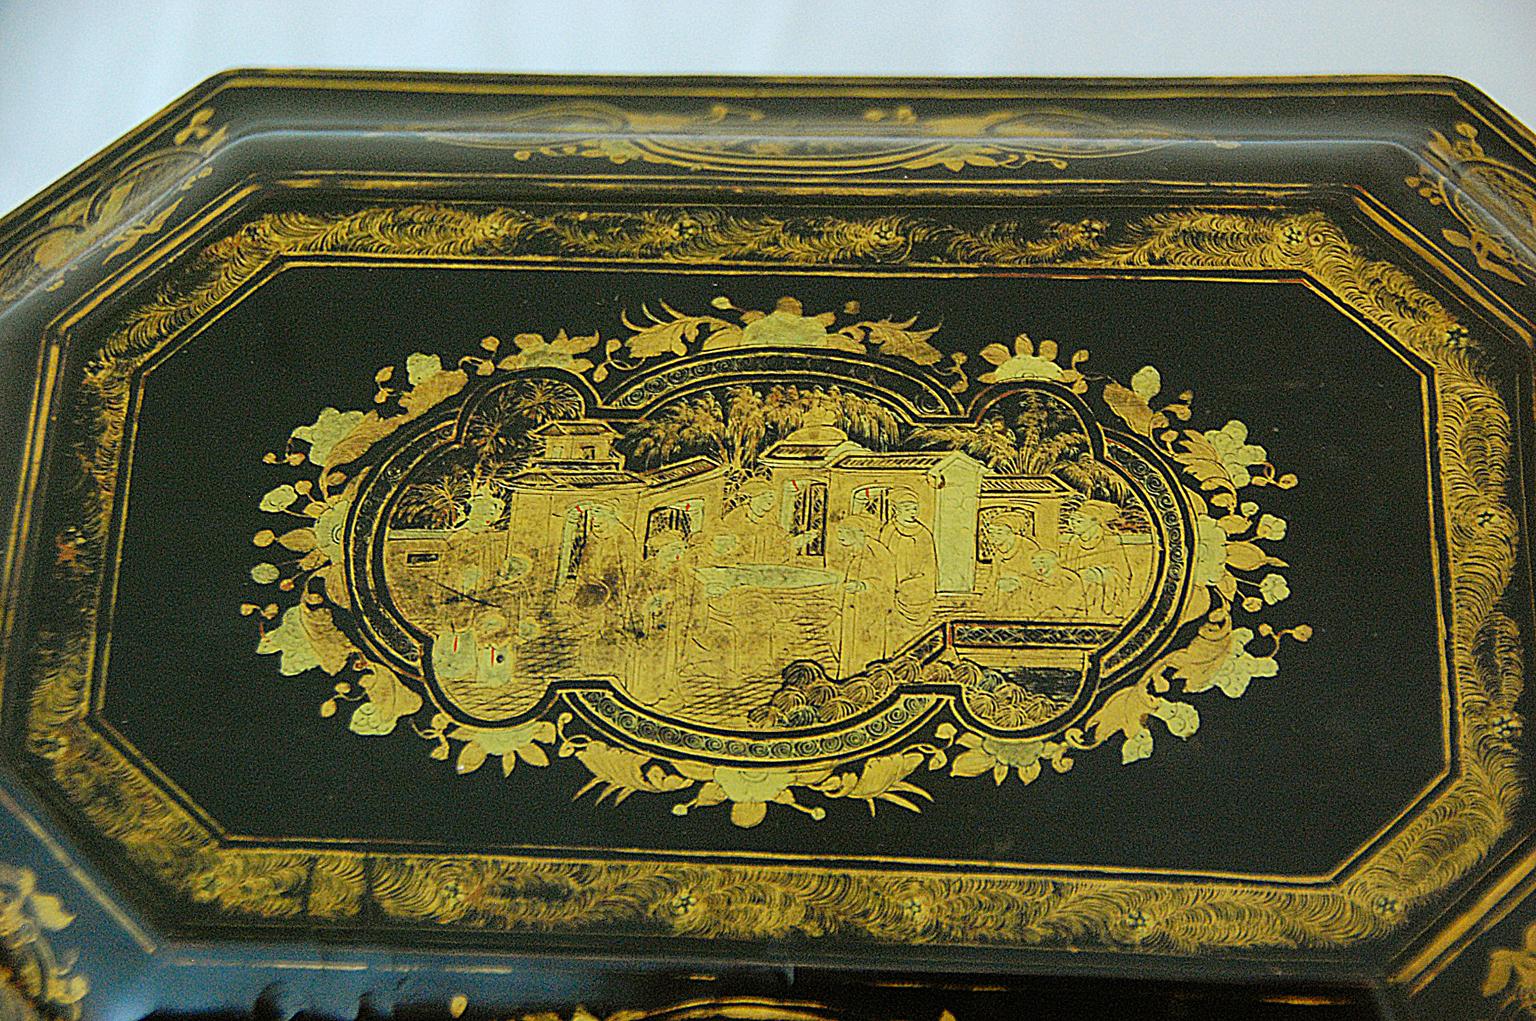 Lacquer Chinese Export Early 19th Century Chinoiserie Teacaddy with Pewter Tea Boxes For Sale